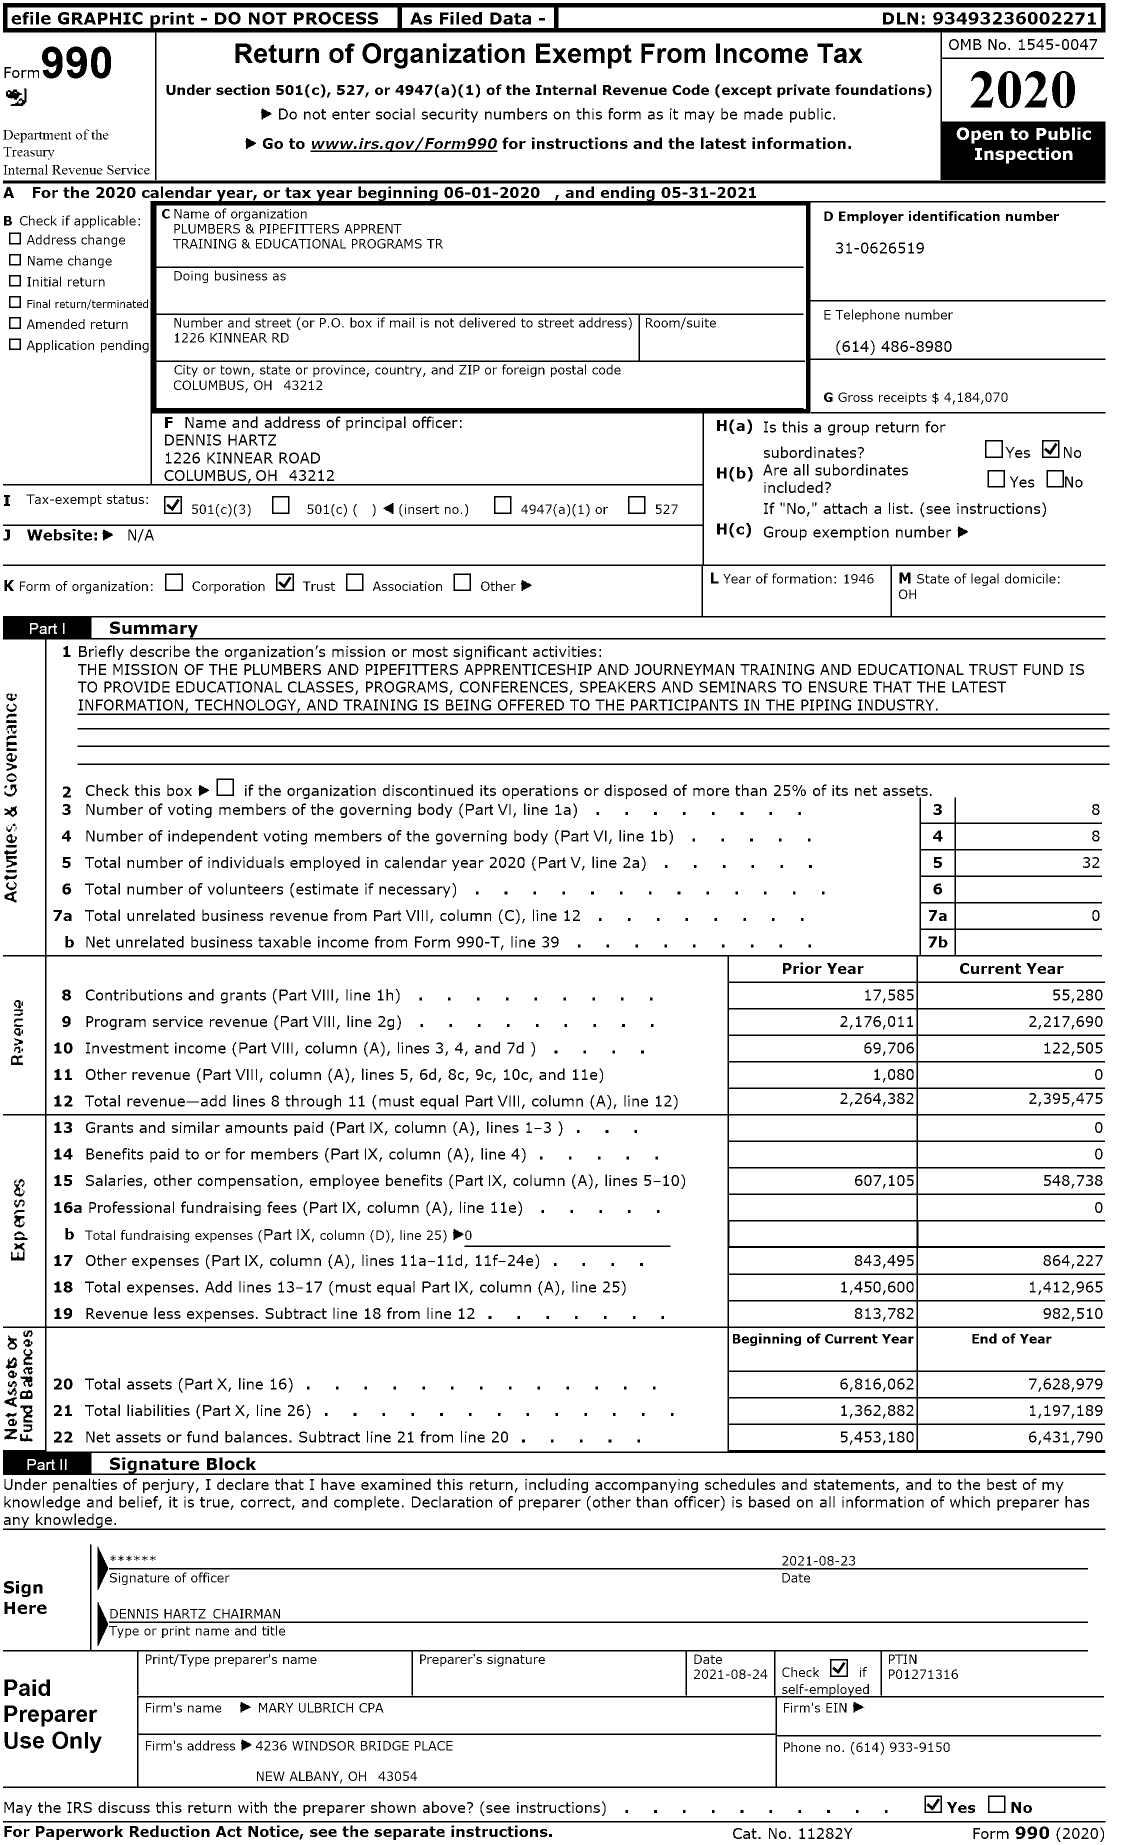 Image of first page of 2020 Form 990 for Plumbers and Pipefitters Apprent Training and Educational Programs Trust